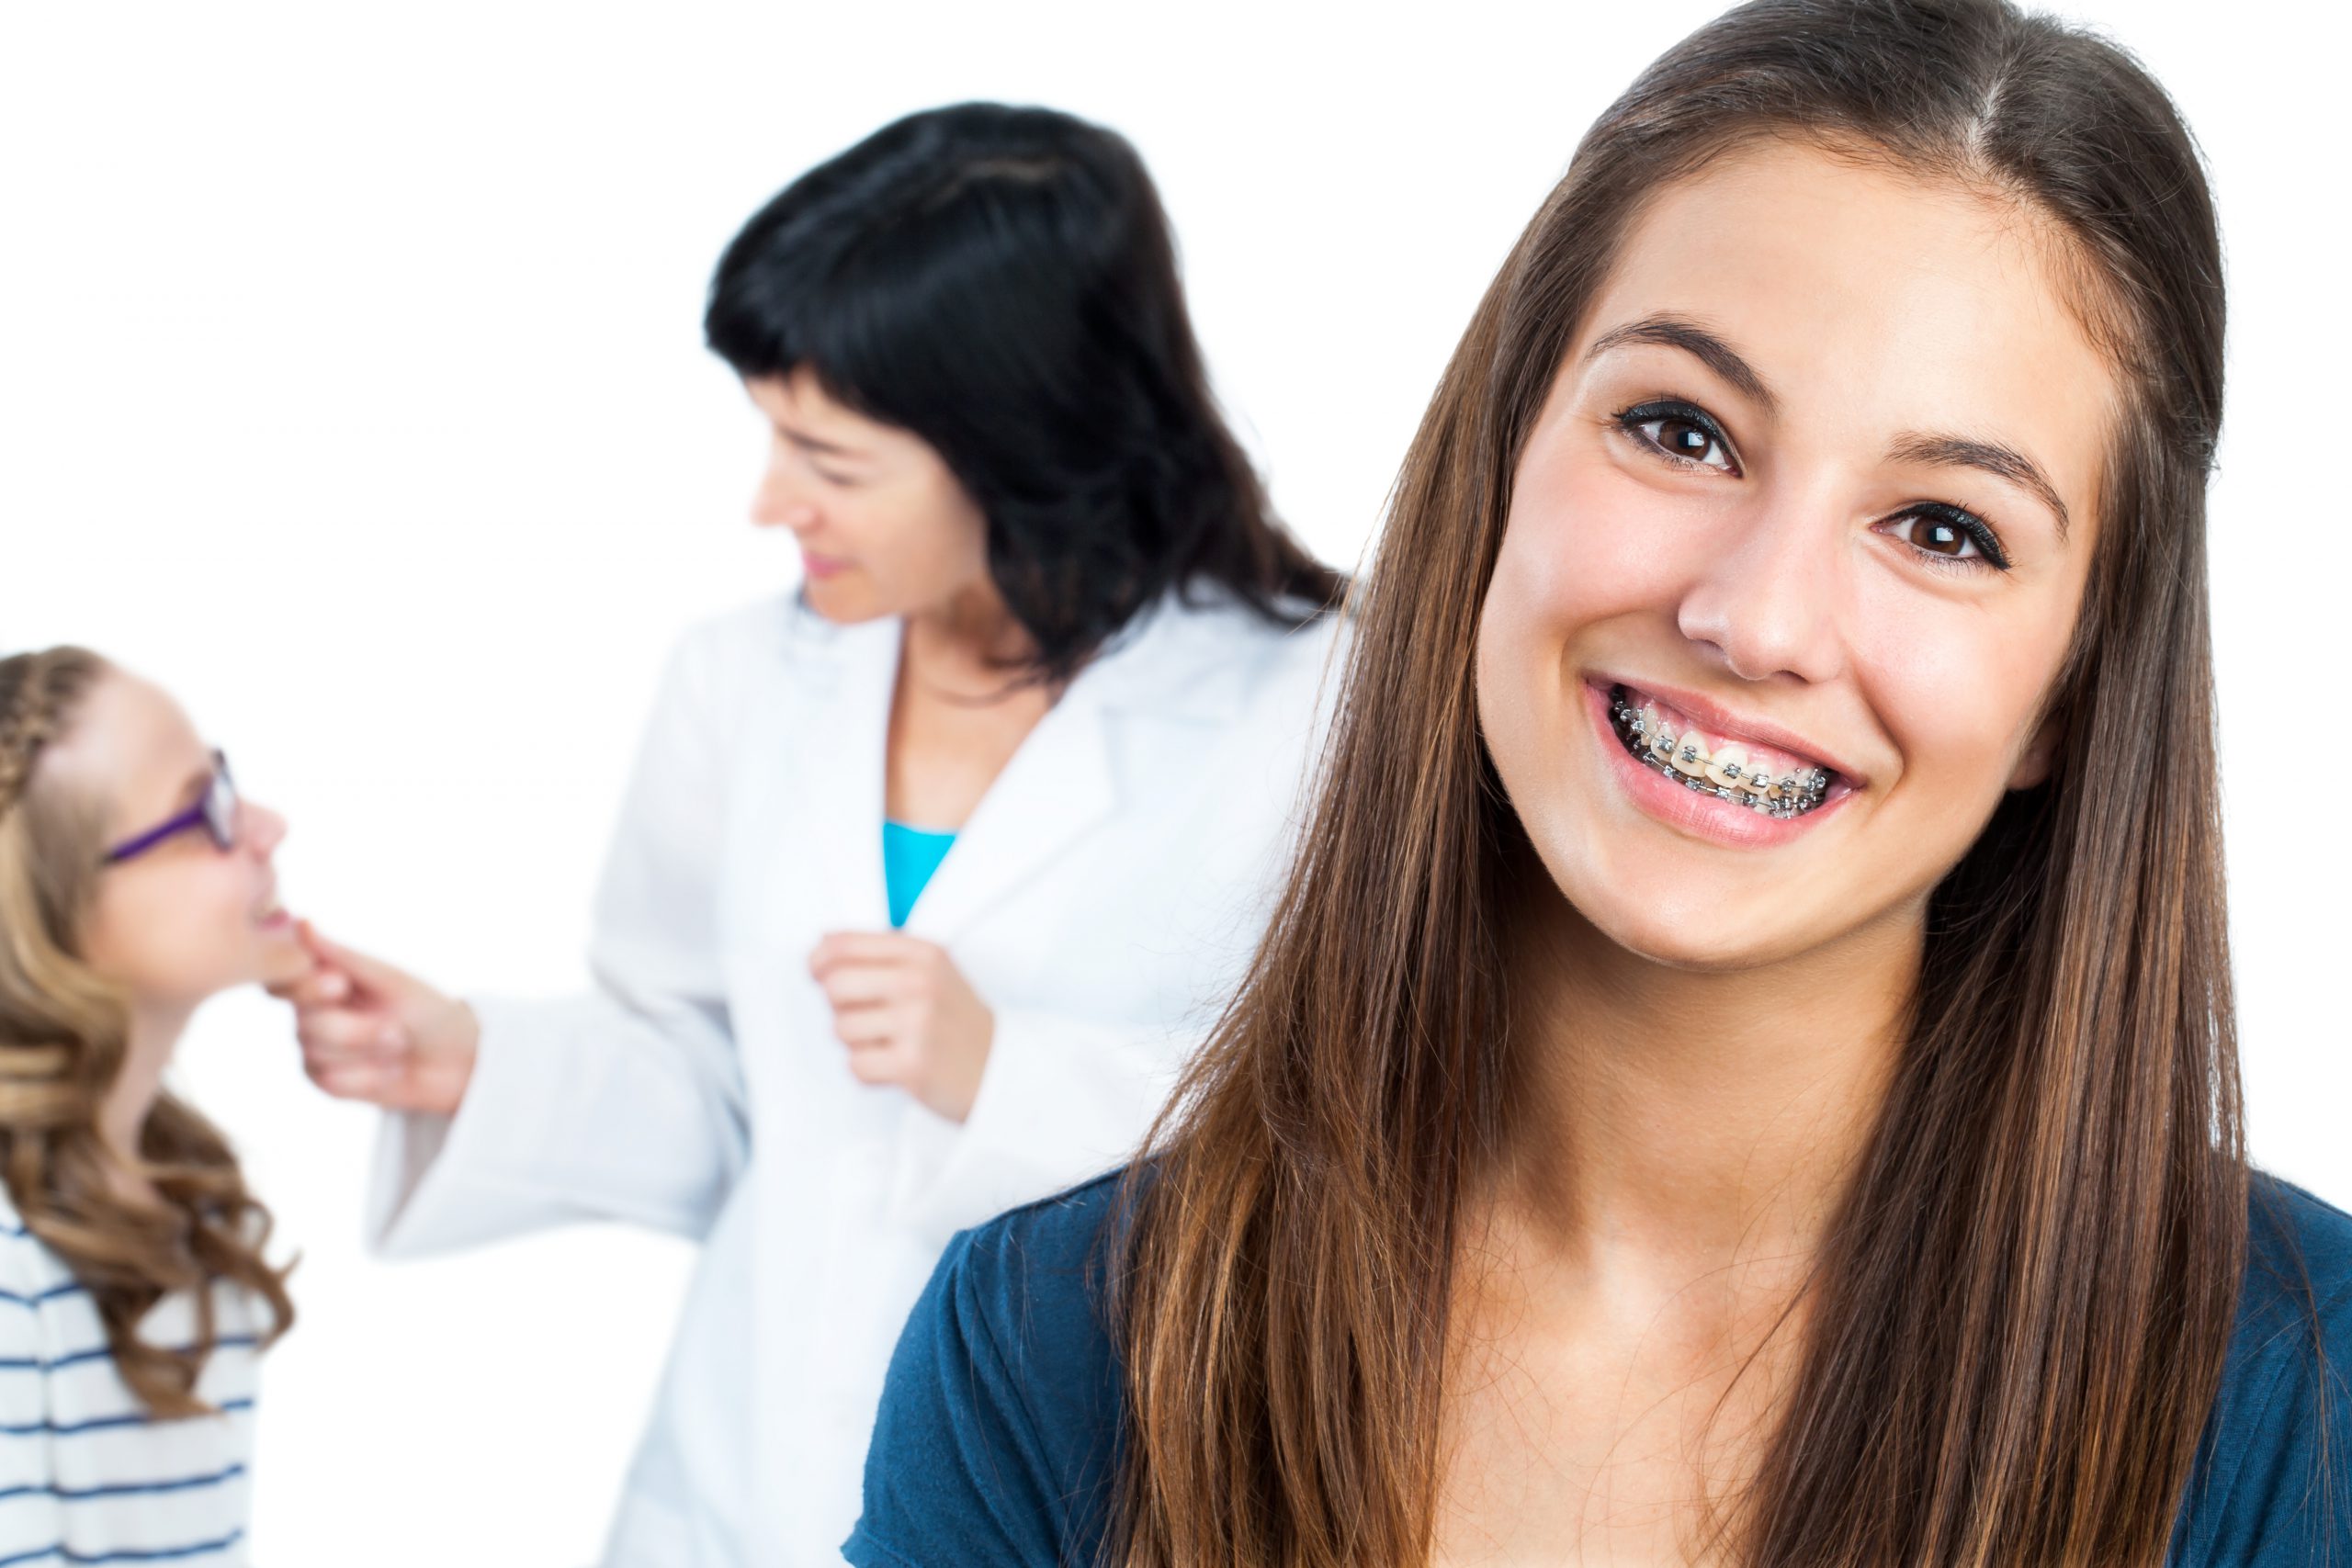 Teen girl with braces and doctor with patient in background.